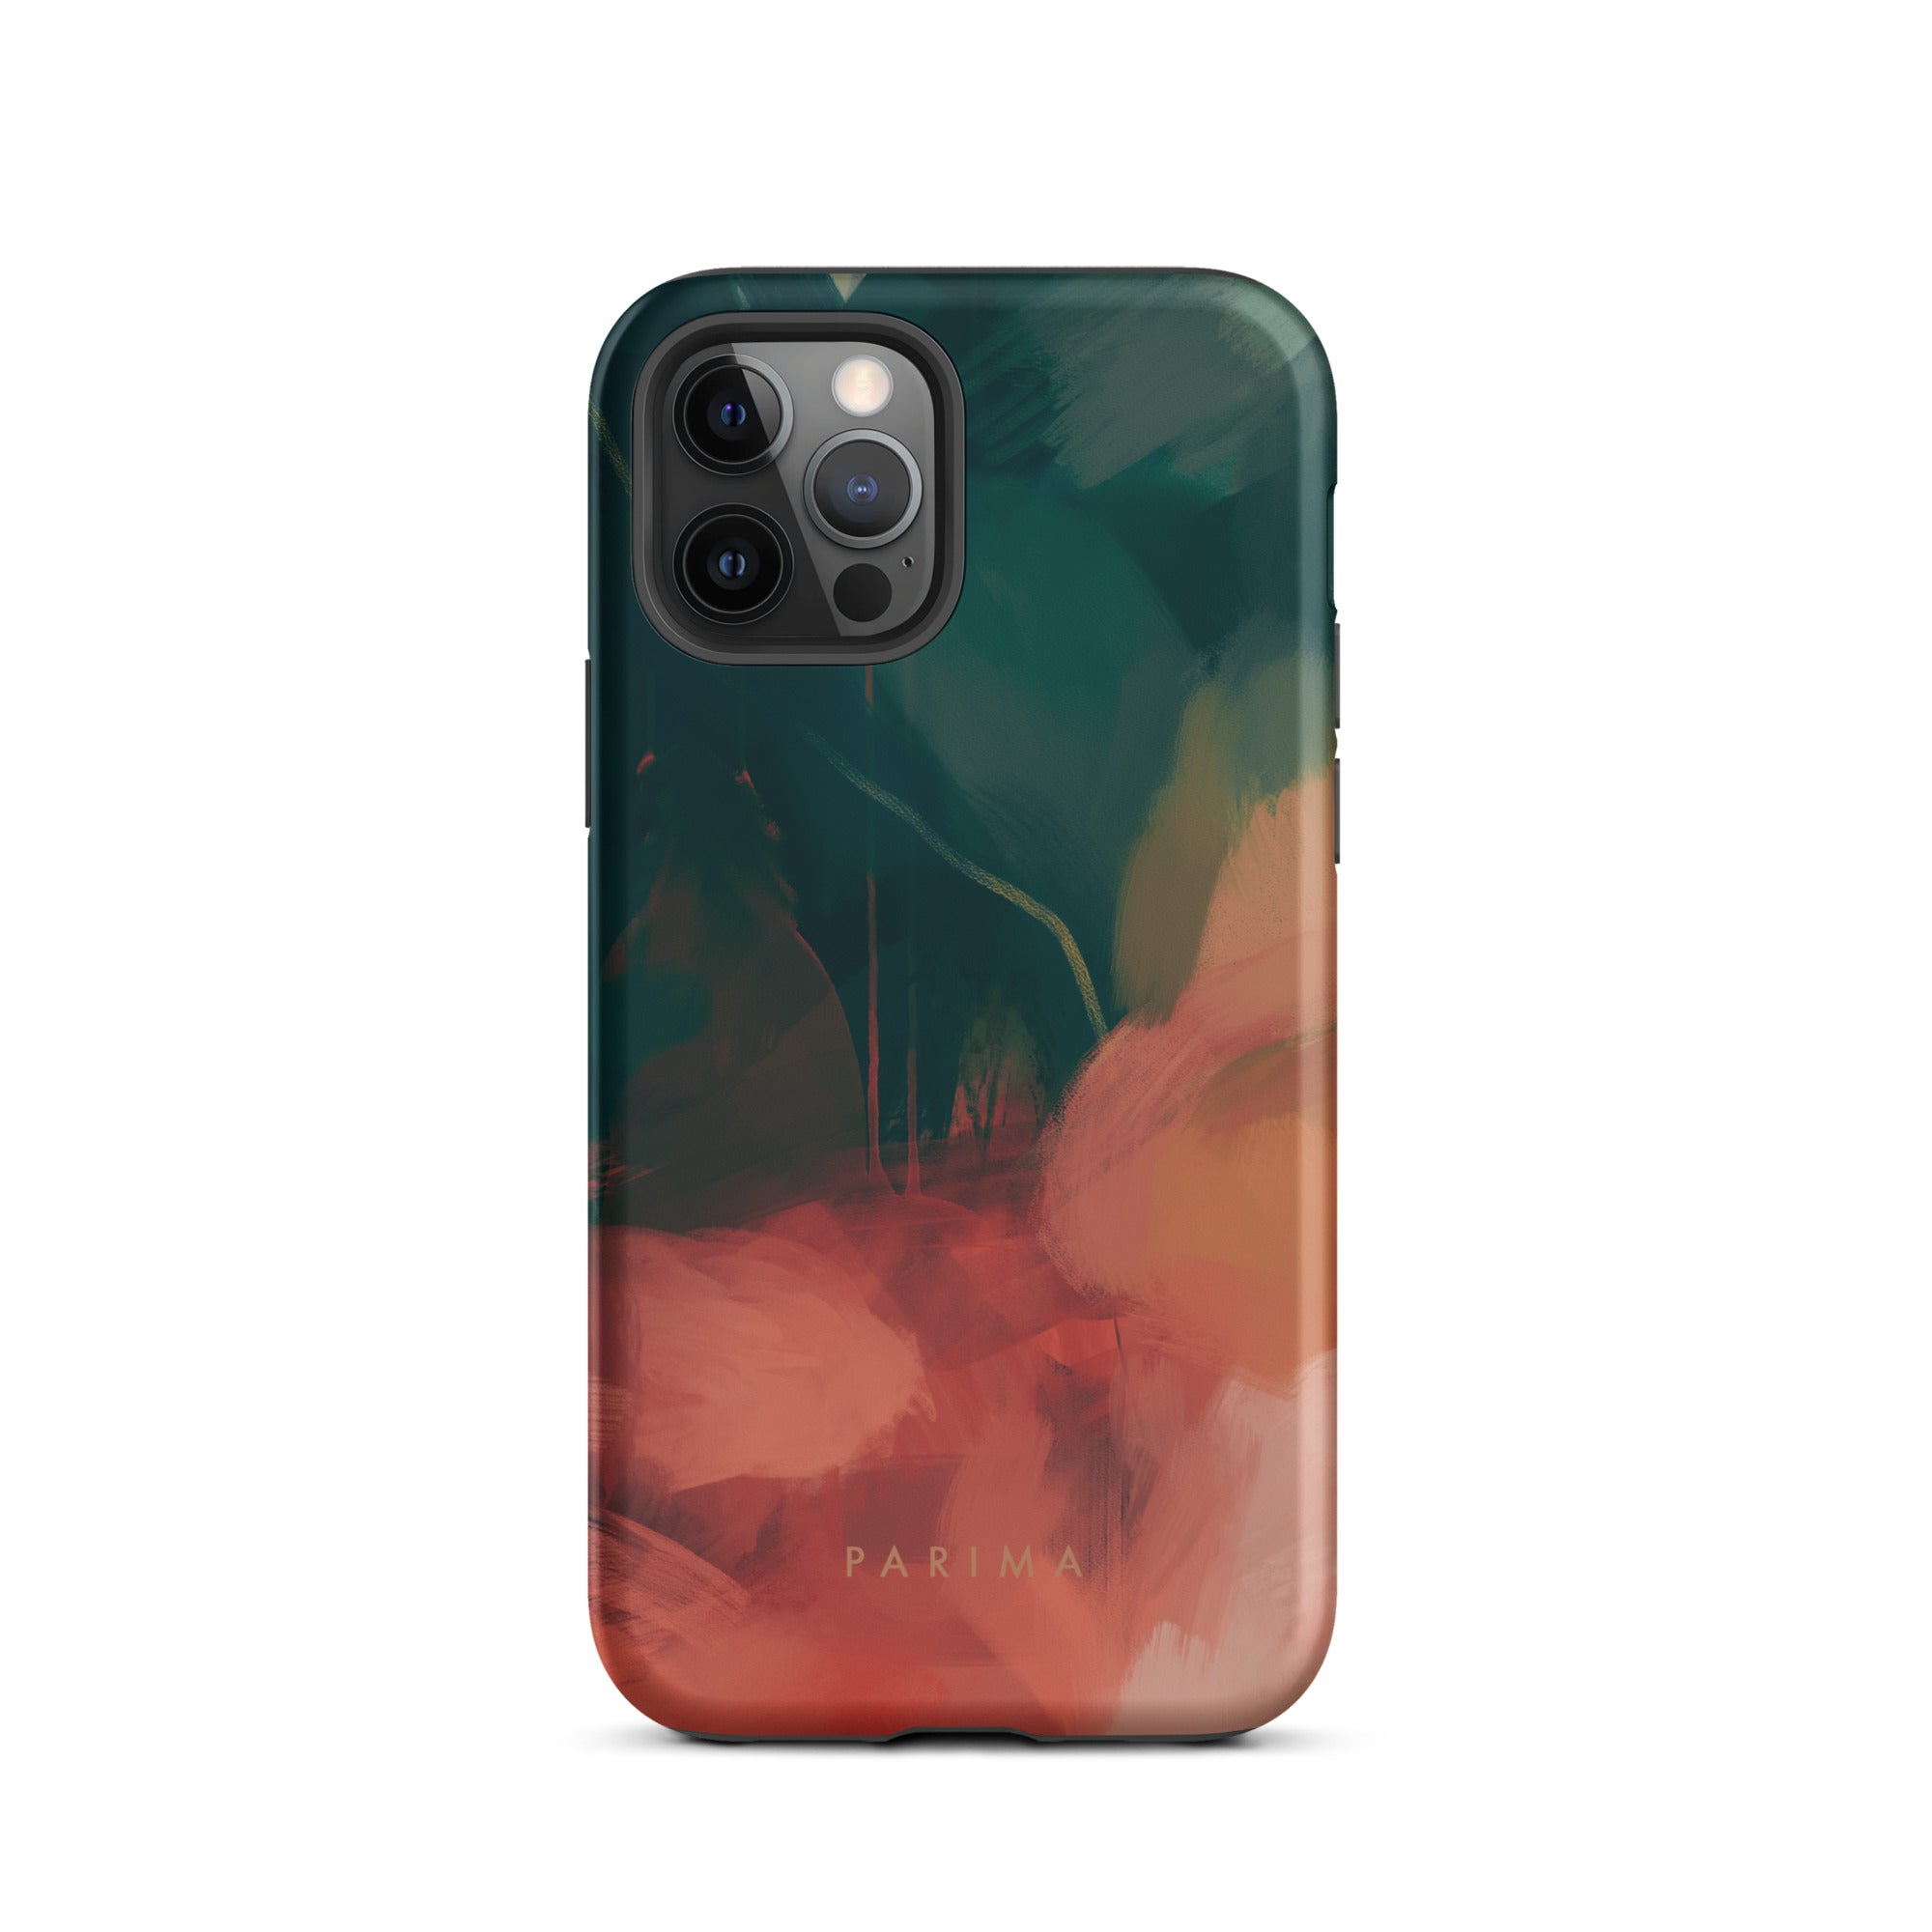 Eventide, green and red abstract art - iPhone 12 Pro tough case by Parima Studio